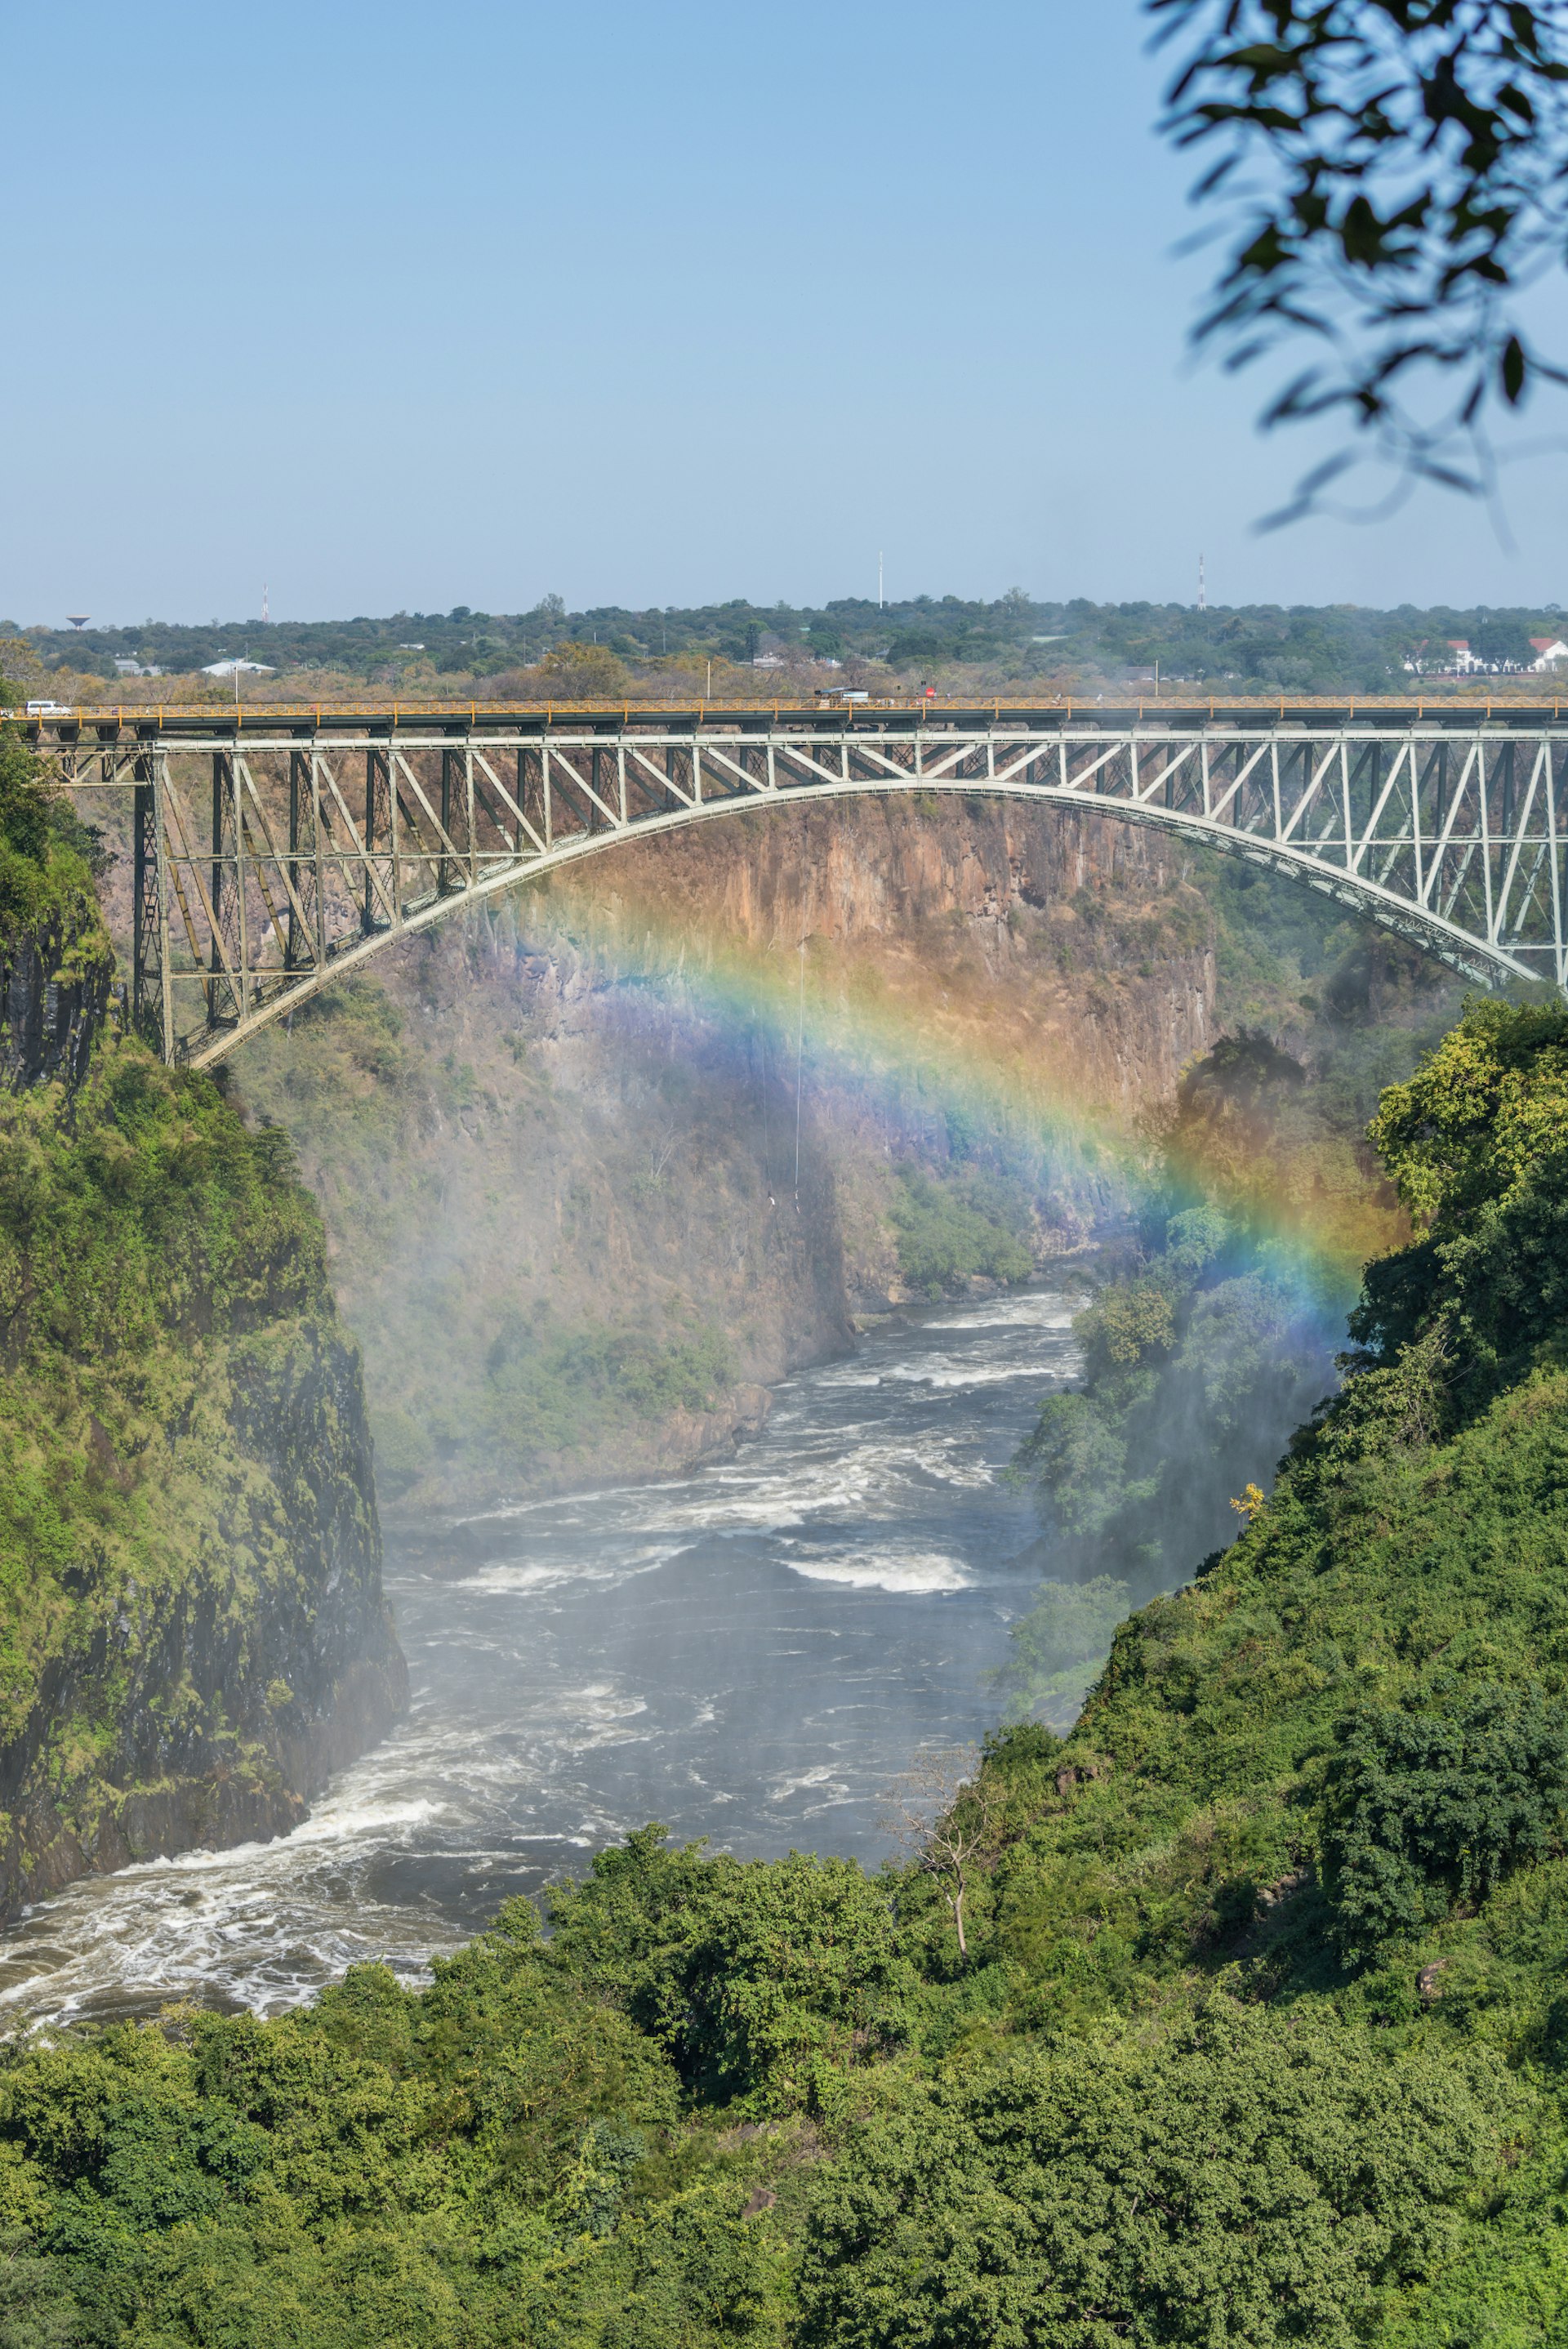 A misty rainbow is seen in front of the bridge, which is high above the Zambezi river. Two bungee jumpers can just be seen dangling below the bridge